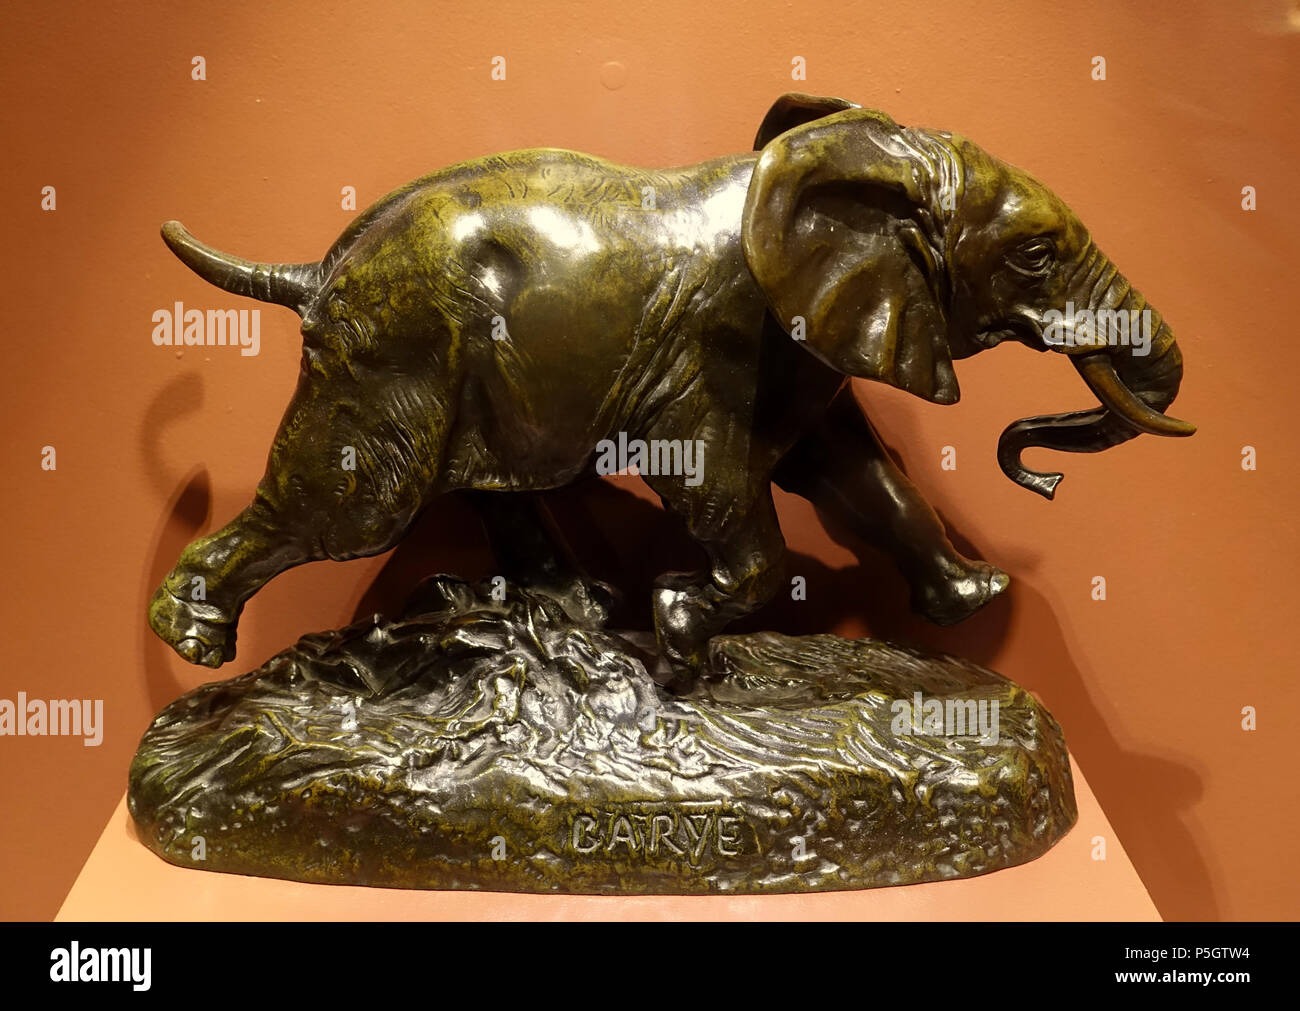 N/A. English: Exhibit in the Middlebury College Museum of Art - Middlebury, Vermont, USA. 4 March 2017, 15:19:18. Daderot 65 African Elephant Running, by Antoine-Louis Barye, undated, bronze - Middlebury College Museum of Art - Middlebury, VT - DSC08144 Stock Photo